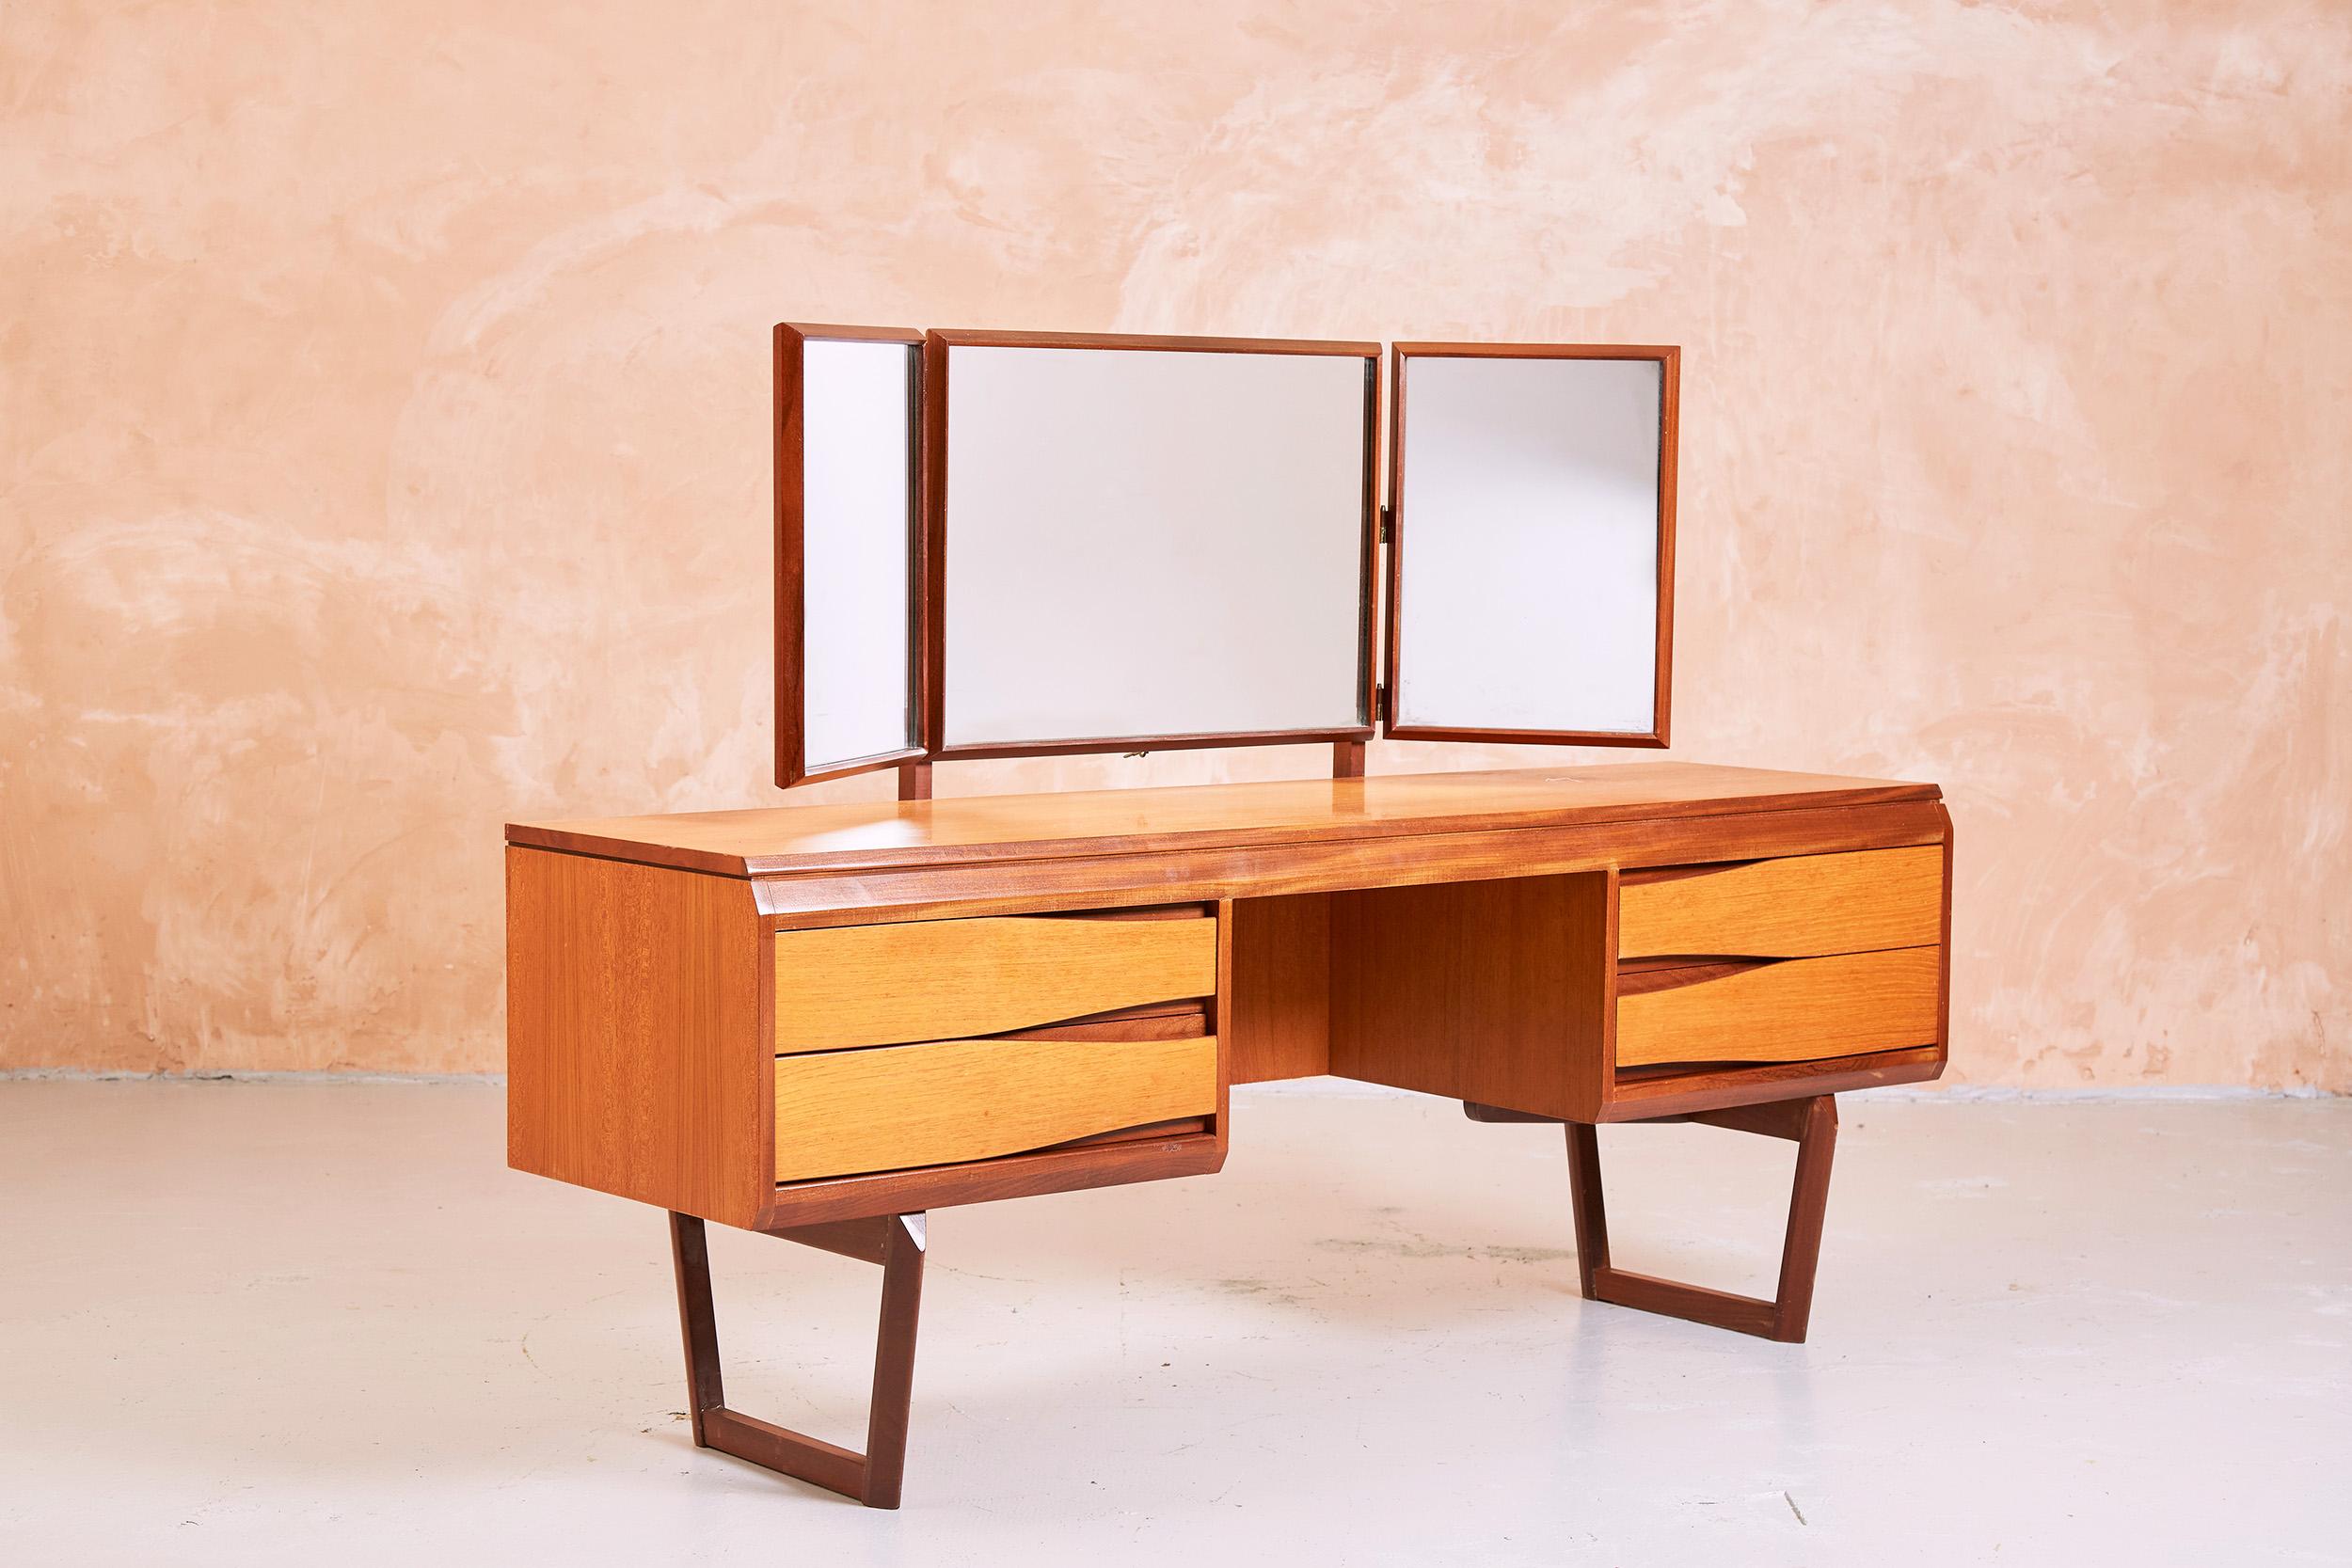 1960s dressing table by White & Newton of Portsmouth.

A scarcely seen model featuring contrasting teak and afromosia timbers, contoured drawers with recessed handles, and solid afromosia sleigh legs.

The dressing table is fitted with three